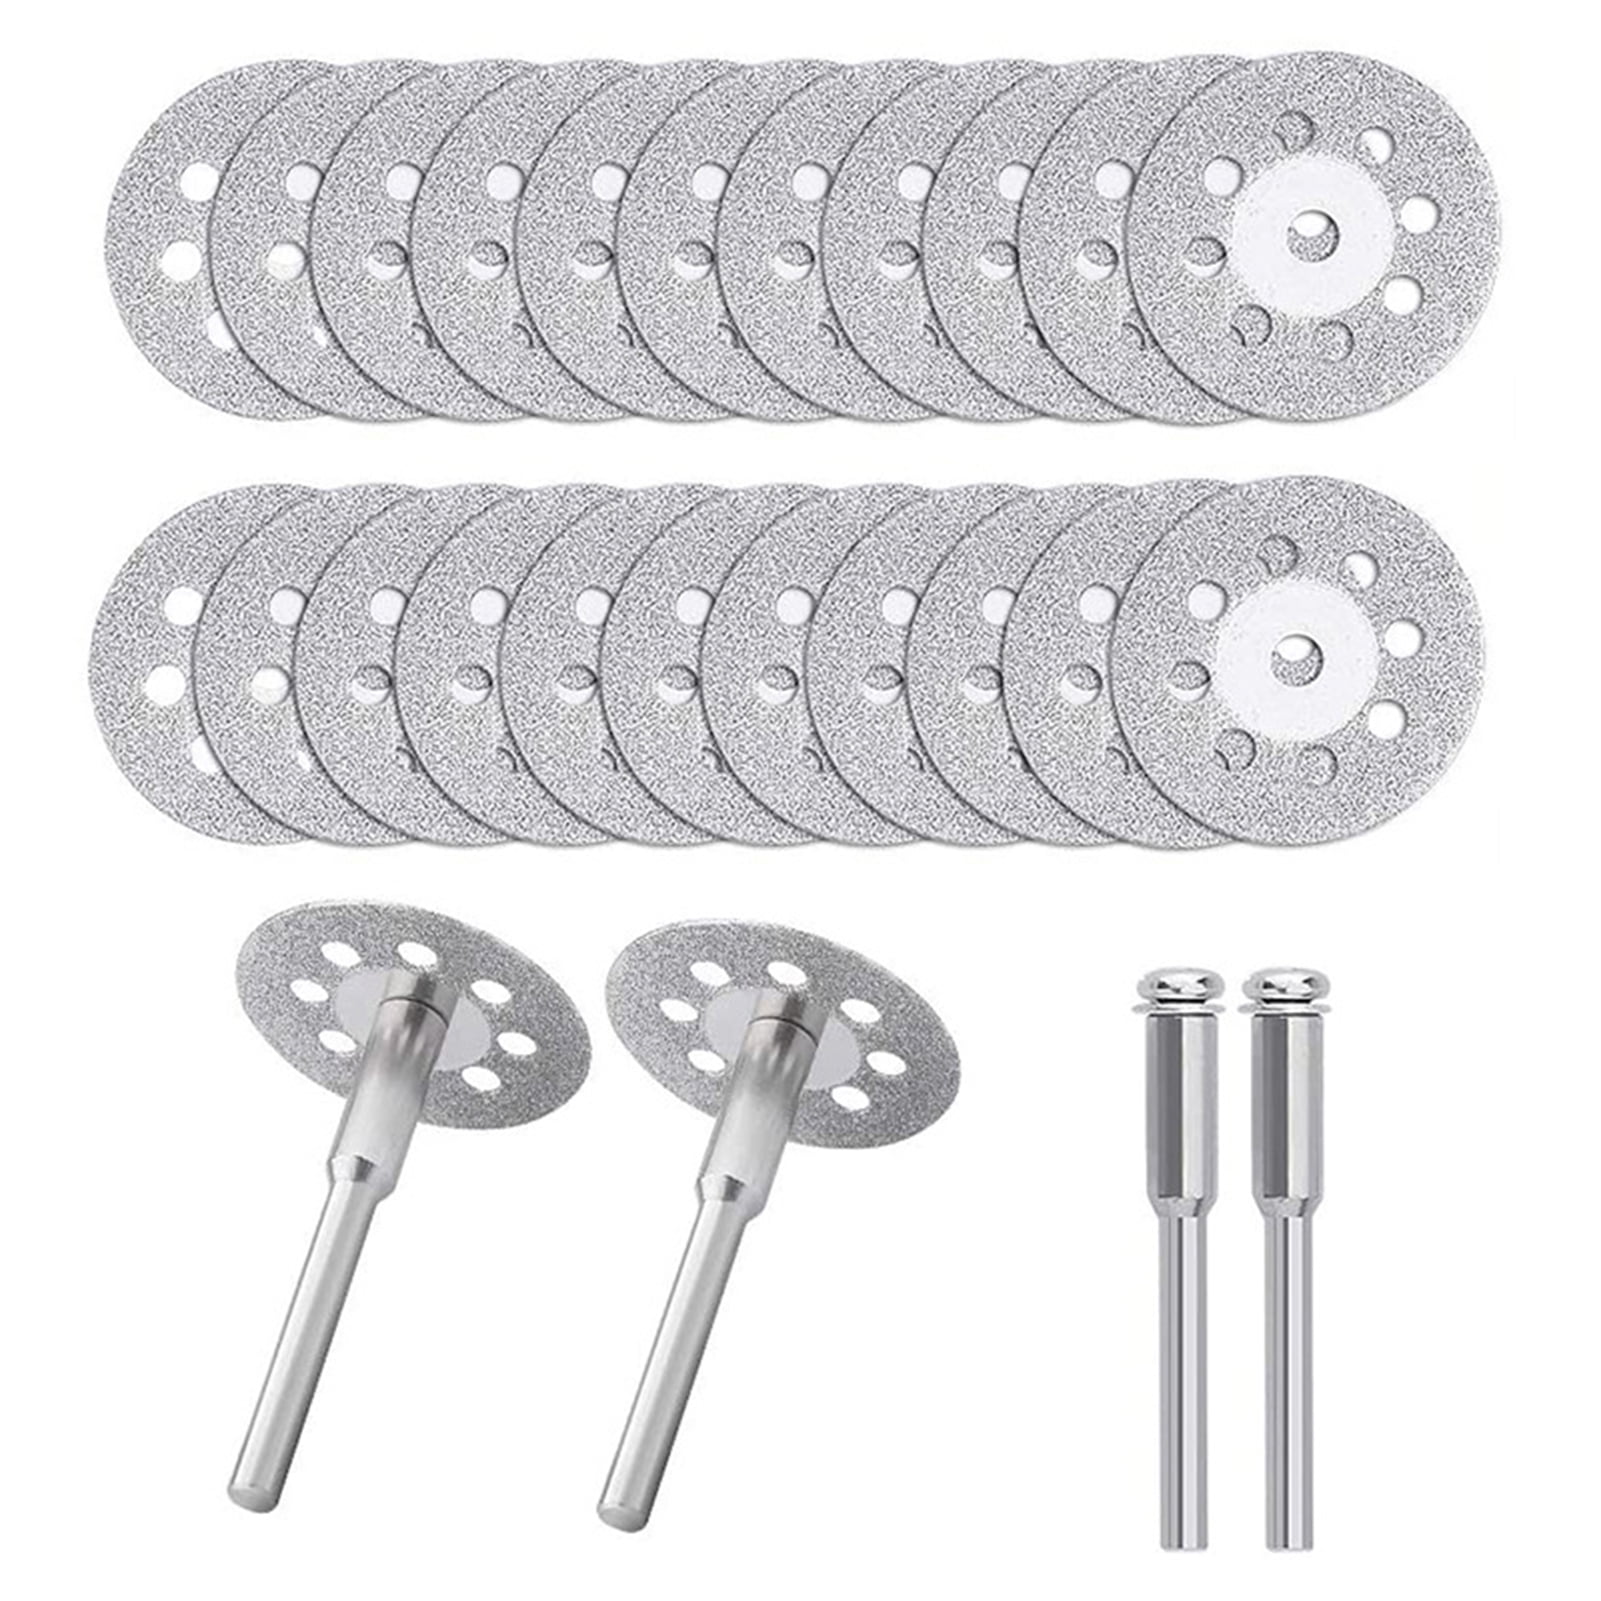 10Pcs 35mm Mini Diamond Cutting Discs with 2 Arbors Rotary Tool for Power Drill 